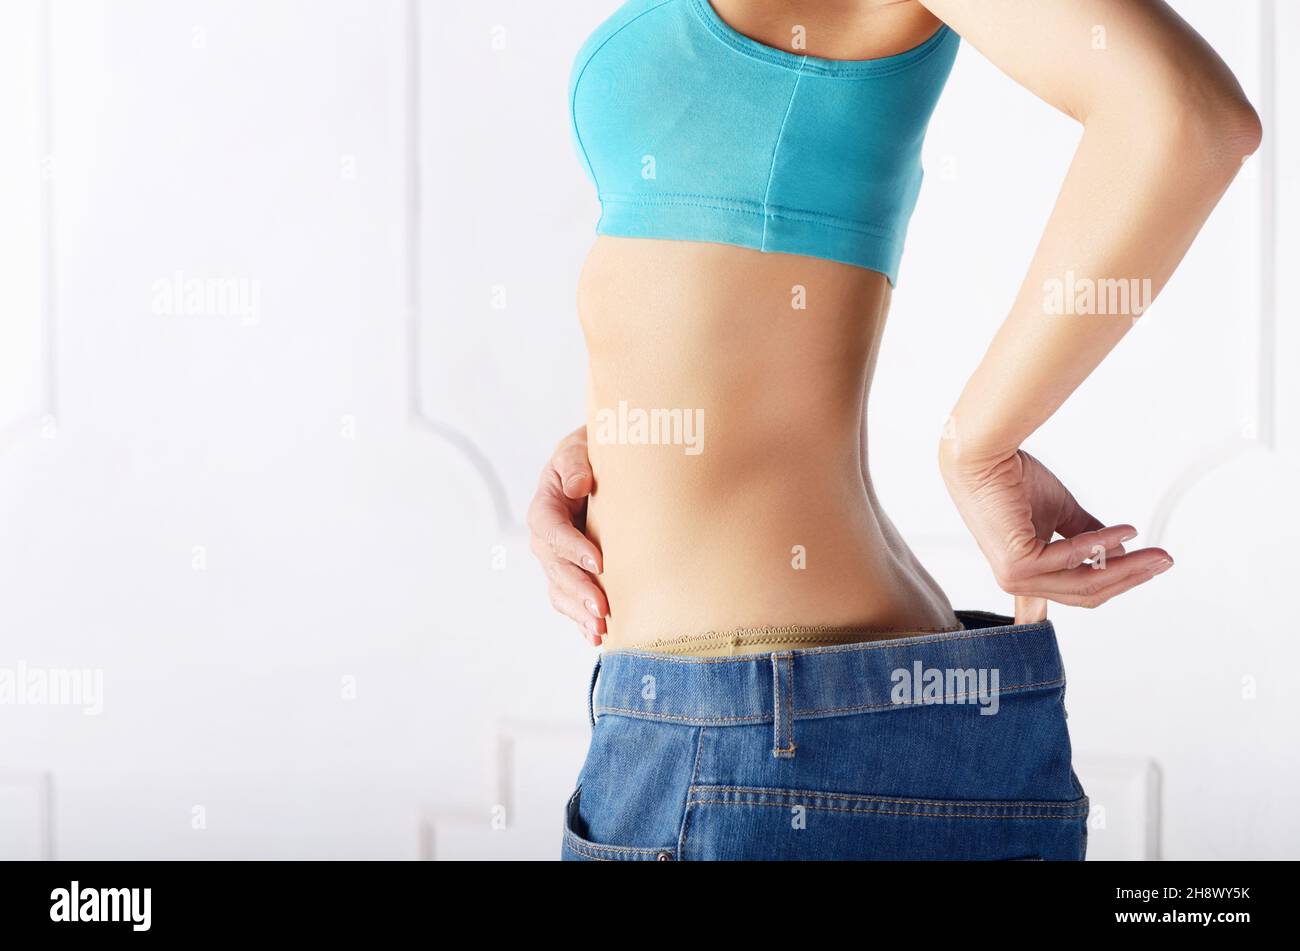 Skinny Weight Loss Woman Show Flat Stomach Pulling by Hands Oversized Big  Blue Pants Jeans Showing Thumbs Up Sign. Slim Body Low Stock Image - Image  of skinny, lost: 214863739